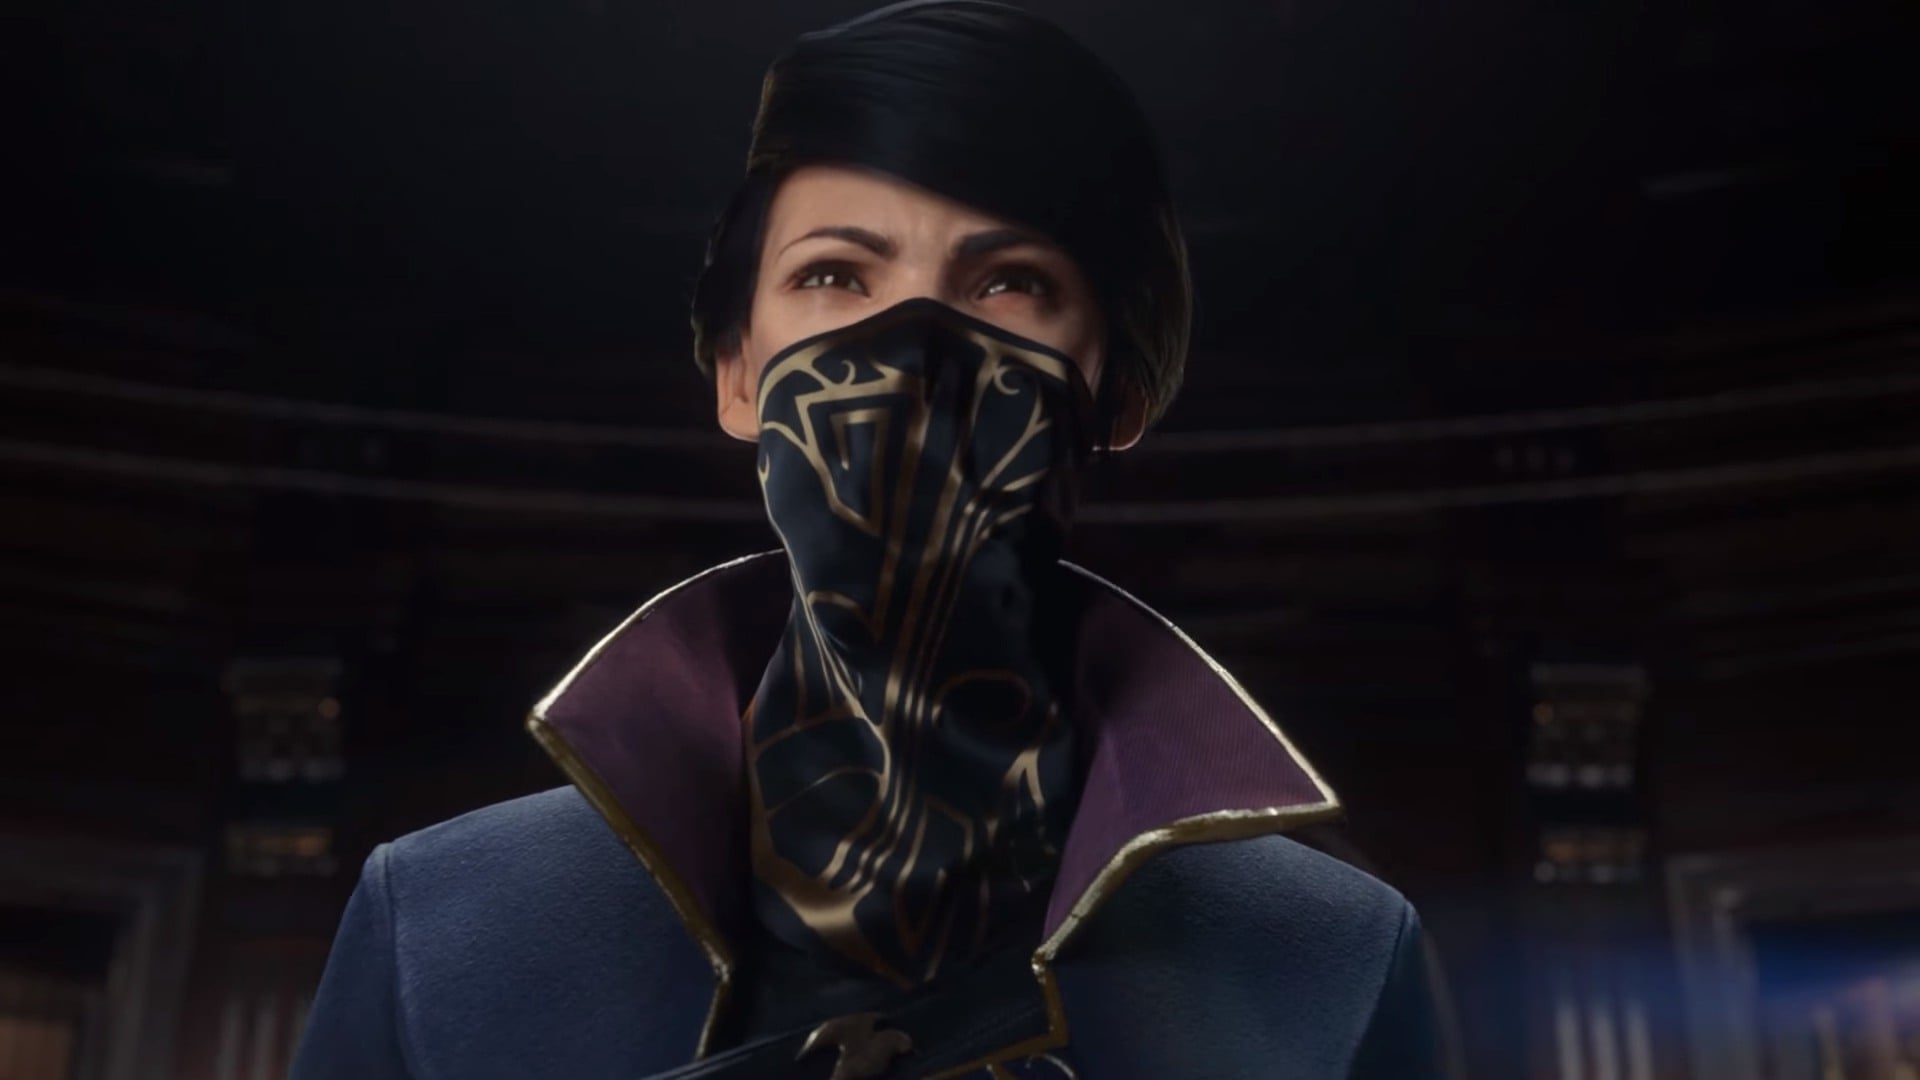 dishonored-2-beta-patch-1-03-now-available-packs-general-performance-optimization-improvements